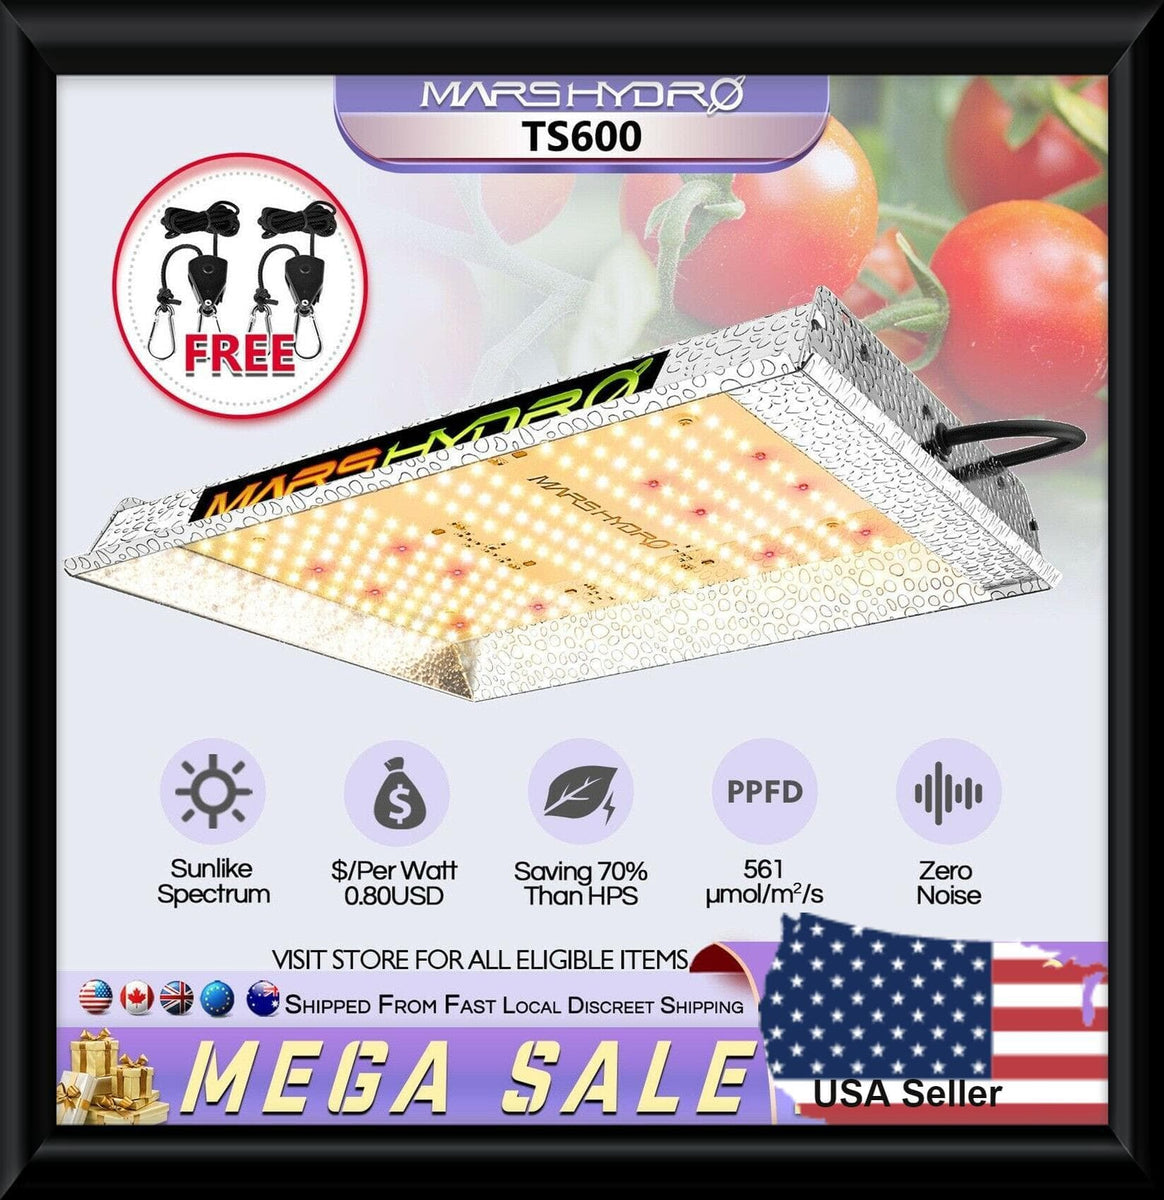 'Get the Best Full Spectrum LED Grow Lights for Your Plants - Replicate Natural Sunlight with LED Grow Light <a href='/bulbs/'>Bulbs</a> for Hydroponic House Plants and Indoor Gardens in UK'